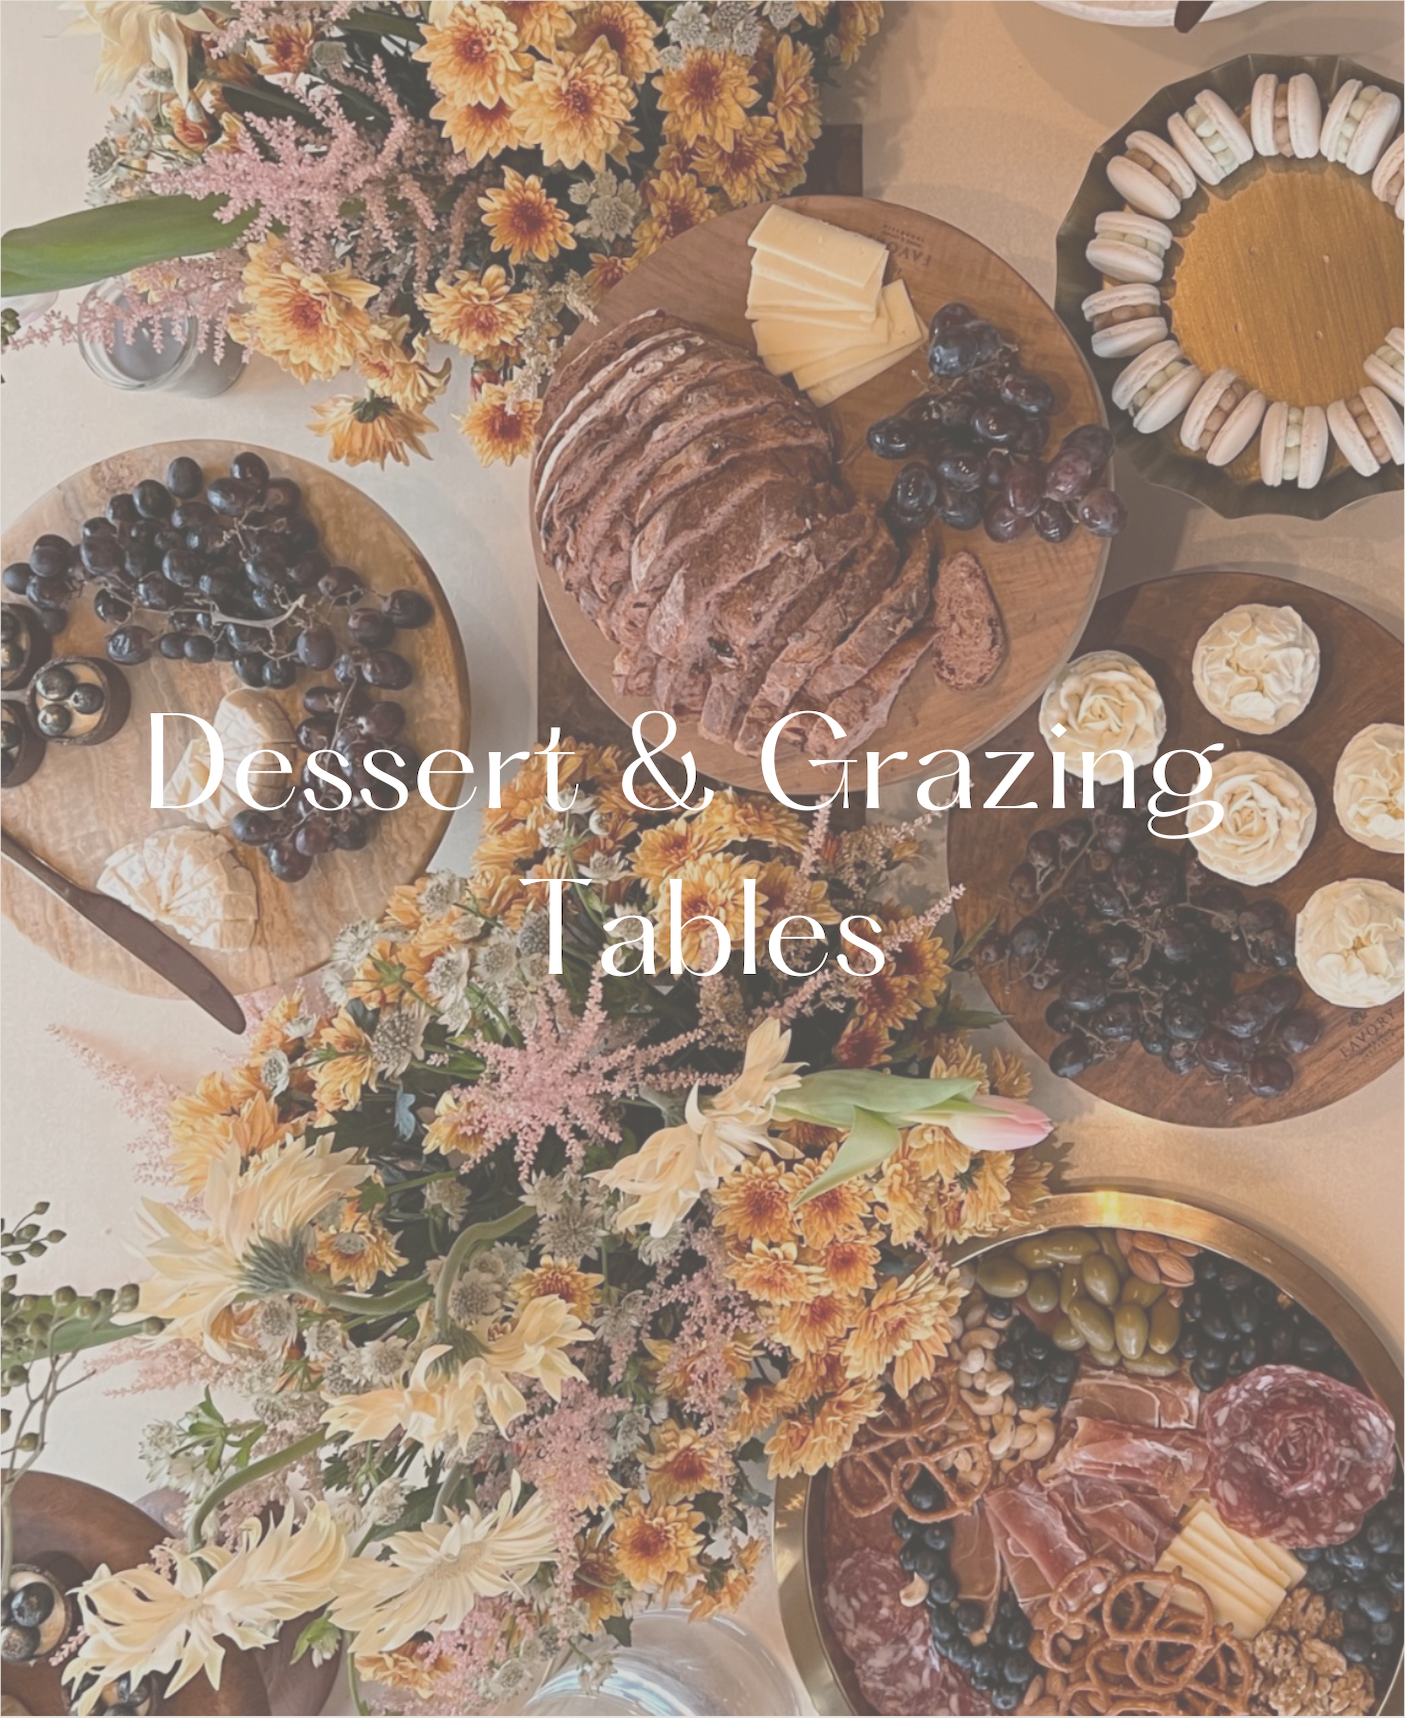 dessert-grazing-table-cover-page-bittersweet